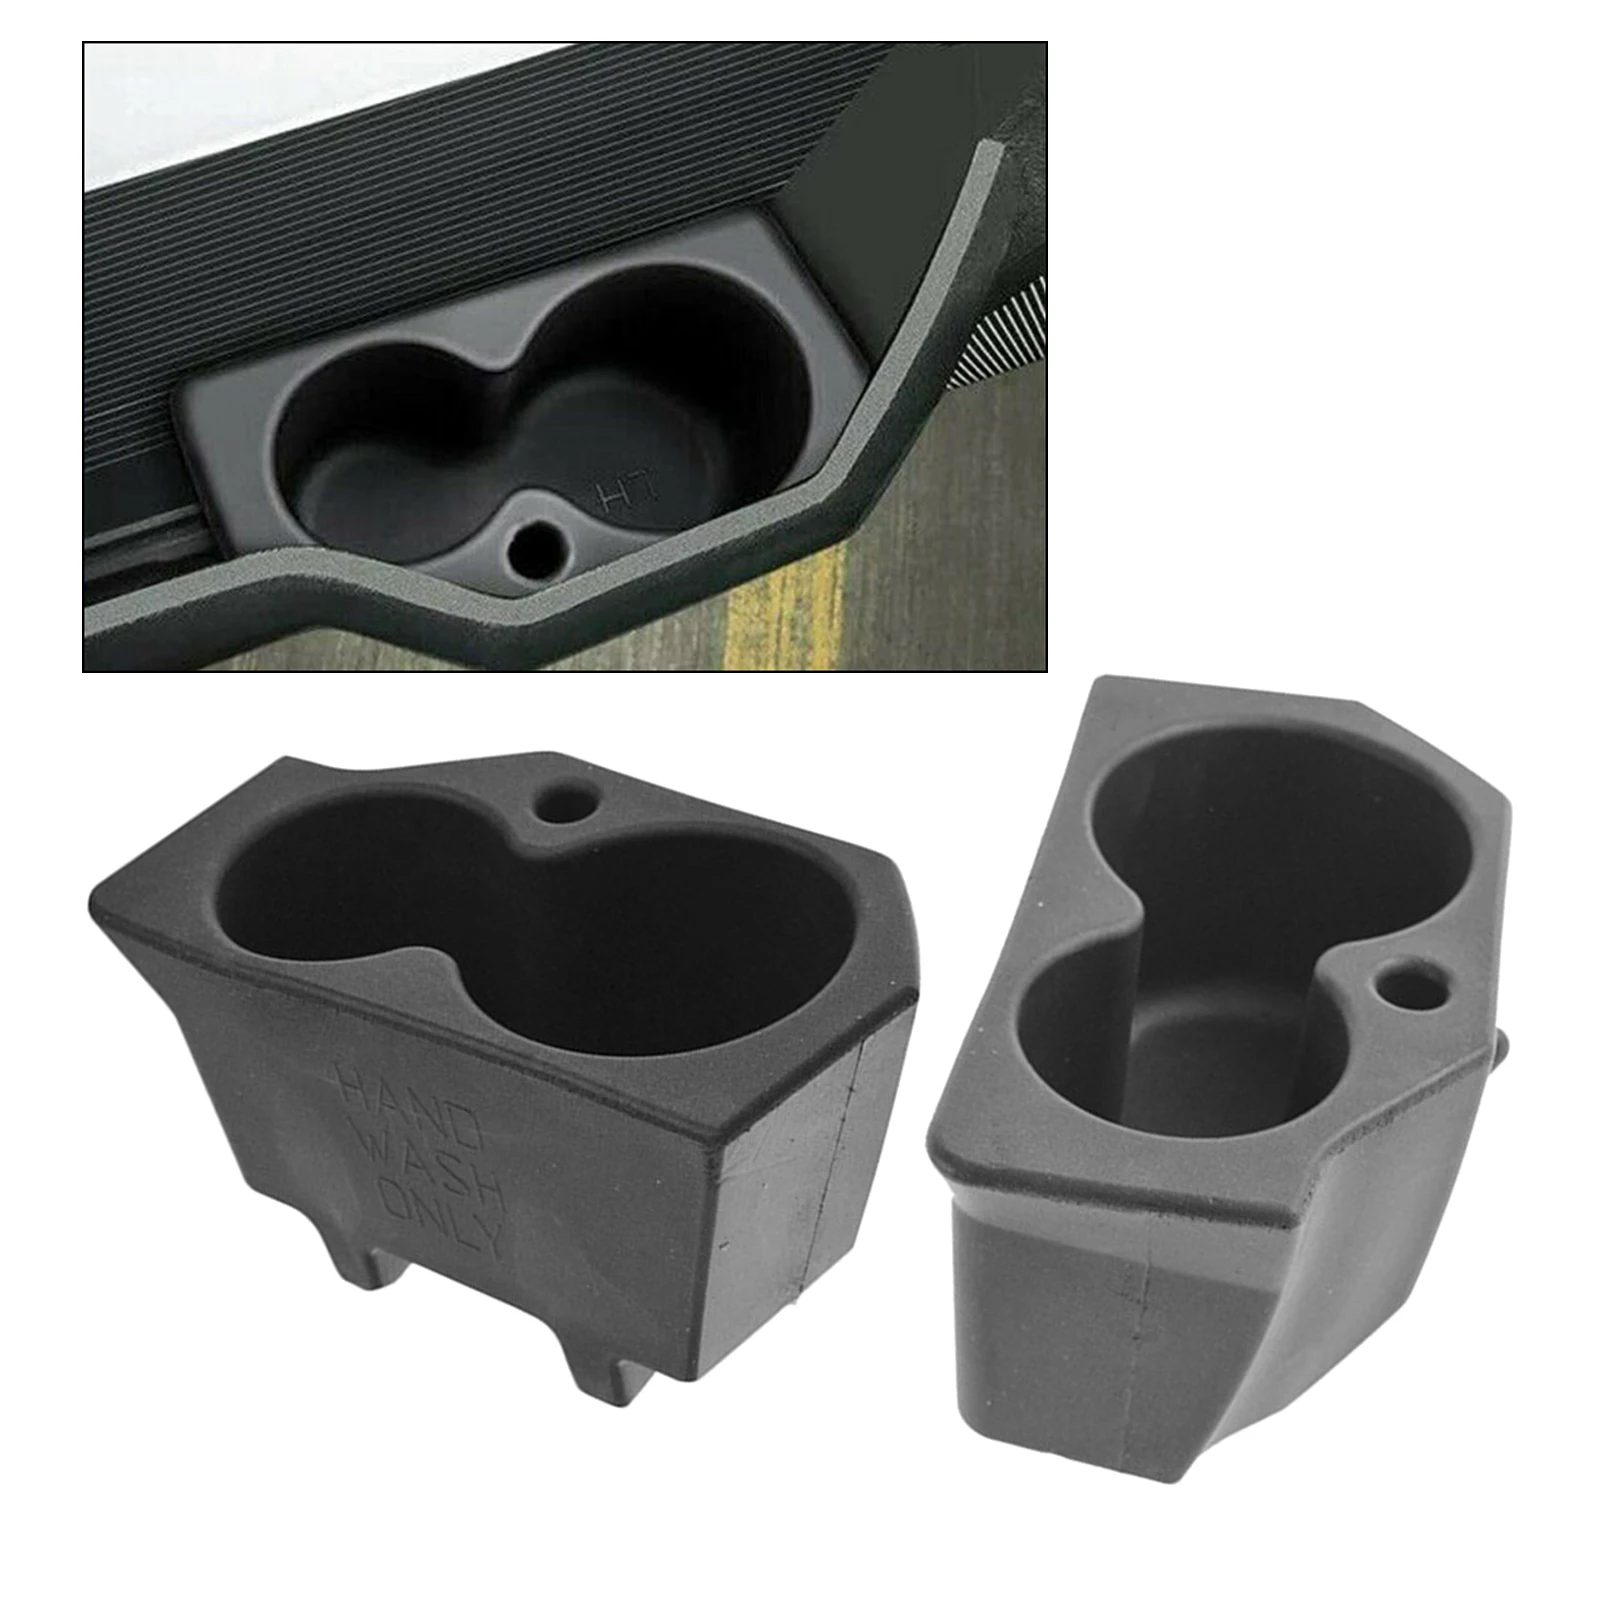 Side Door Trim Cupholders Cup Holder Non-slip Fits for Ram 1500 3500 4500 Car Vehicle Replace Parts Accessories